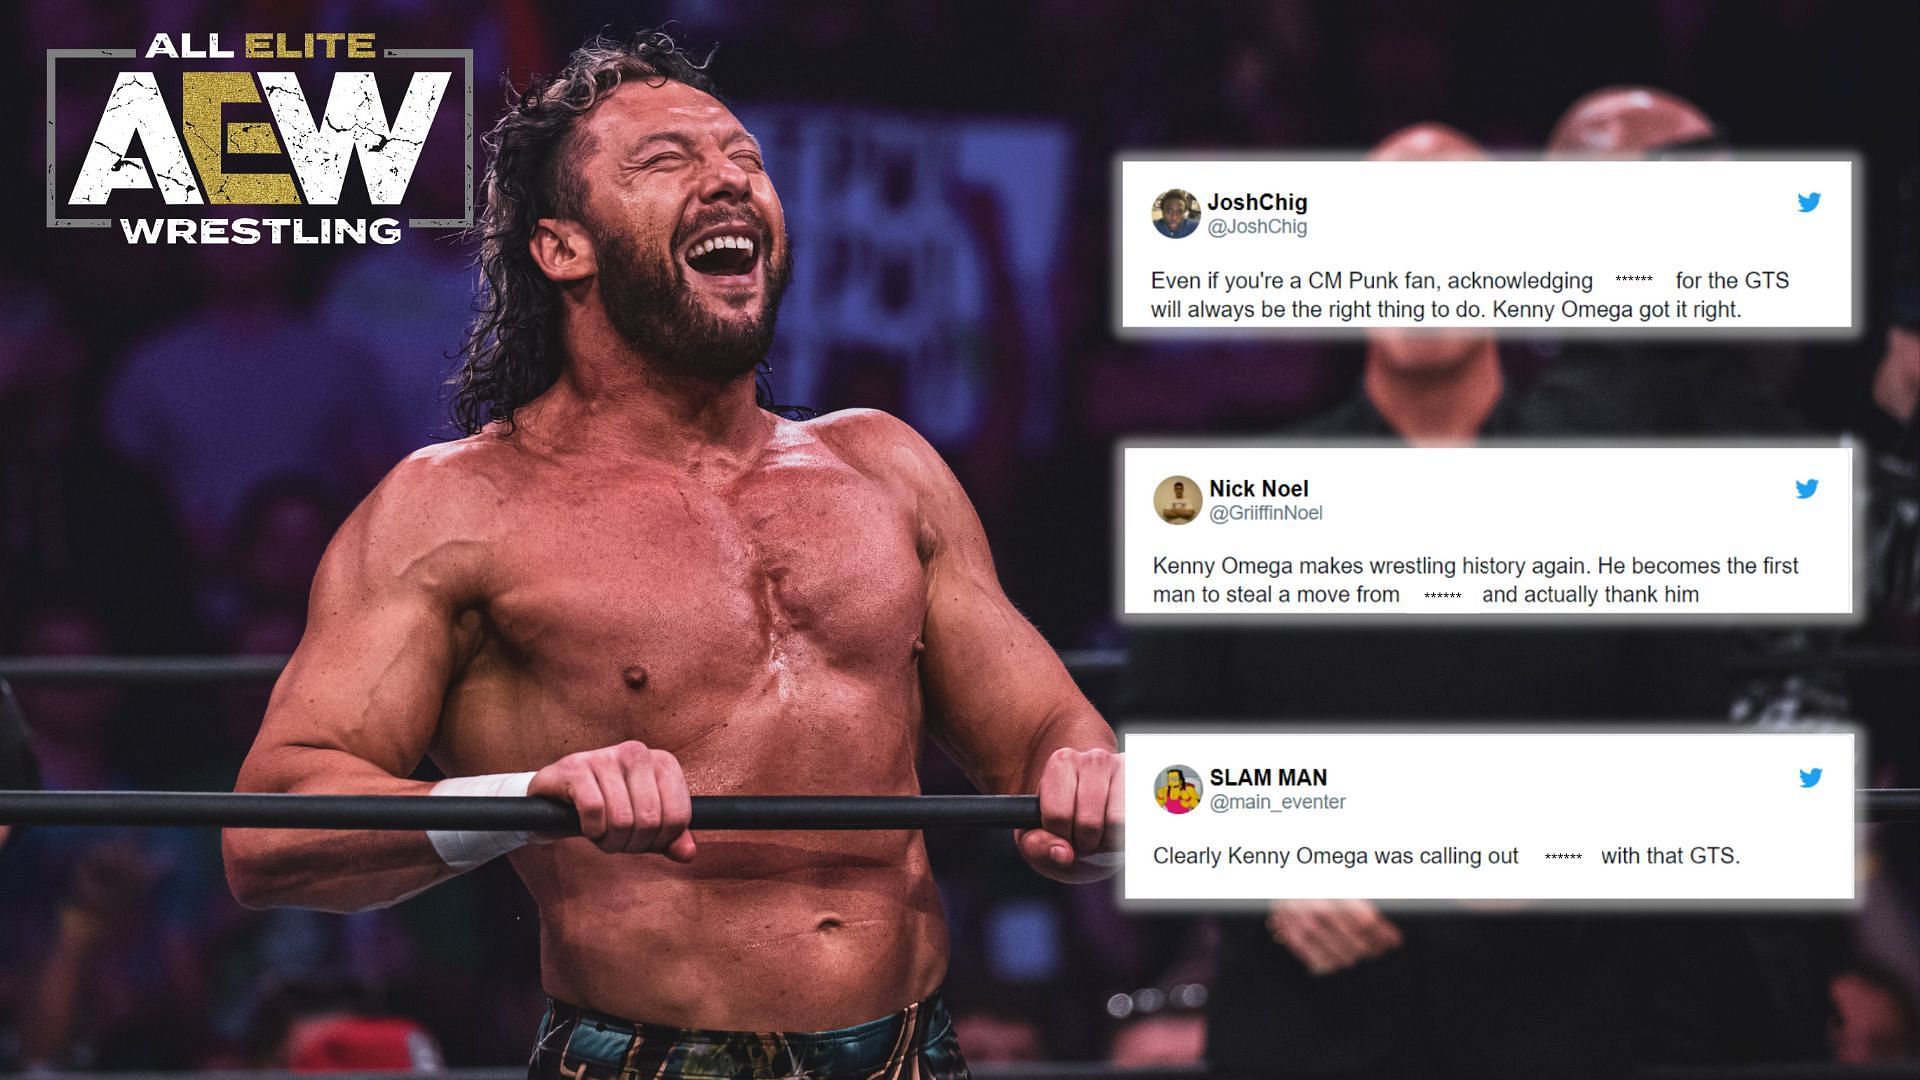 Kenny Omega recently made headlines for the use of the GTS finisher